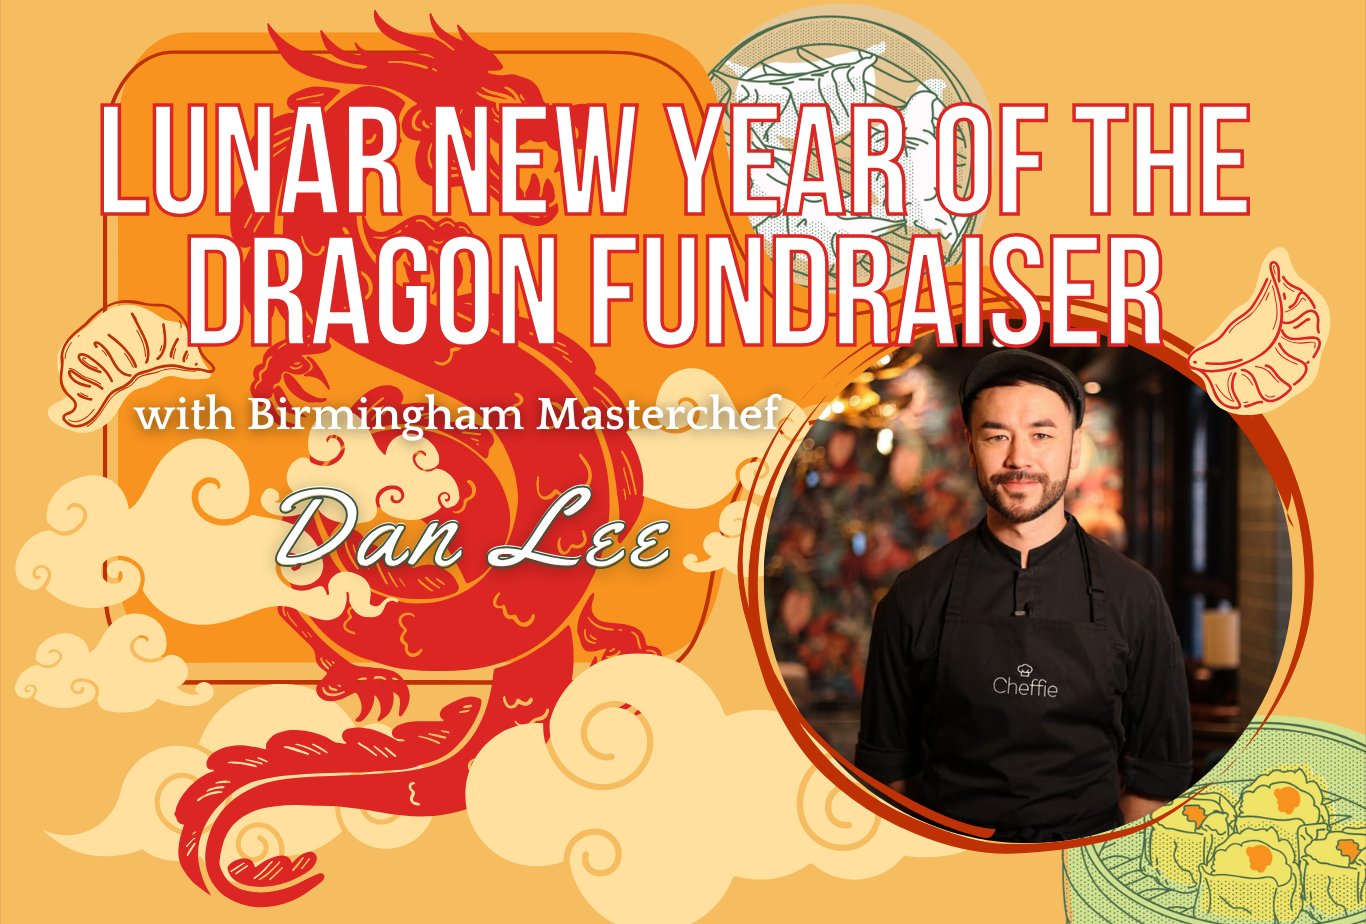 Lunar New Year of the Dragon fundraiser